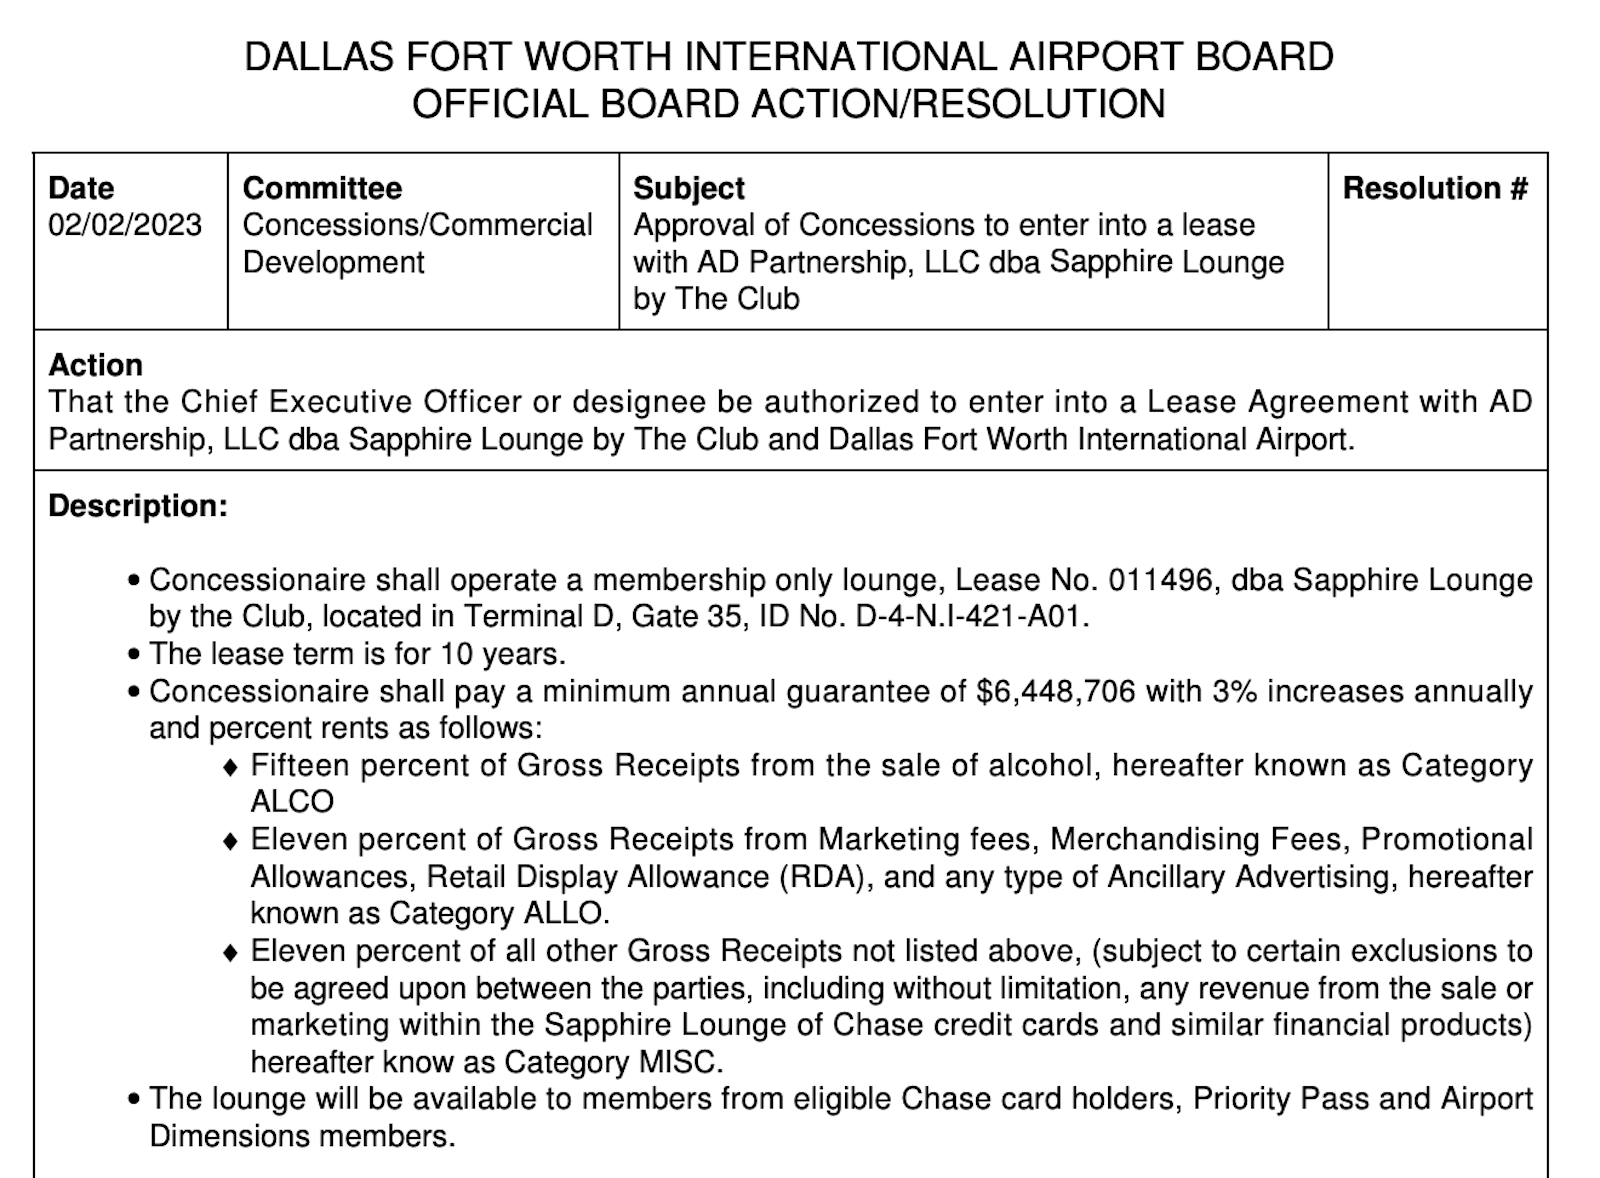 details on proposal of lounge for airport board consideration